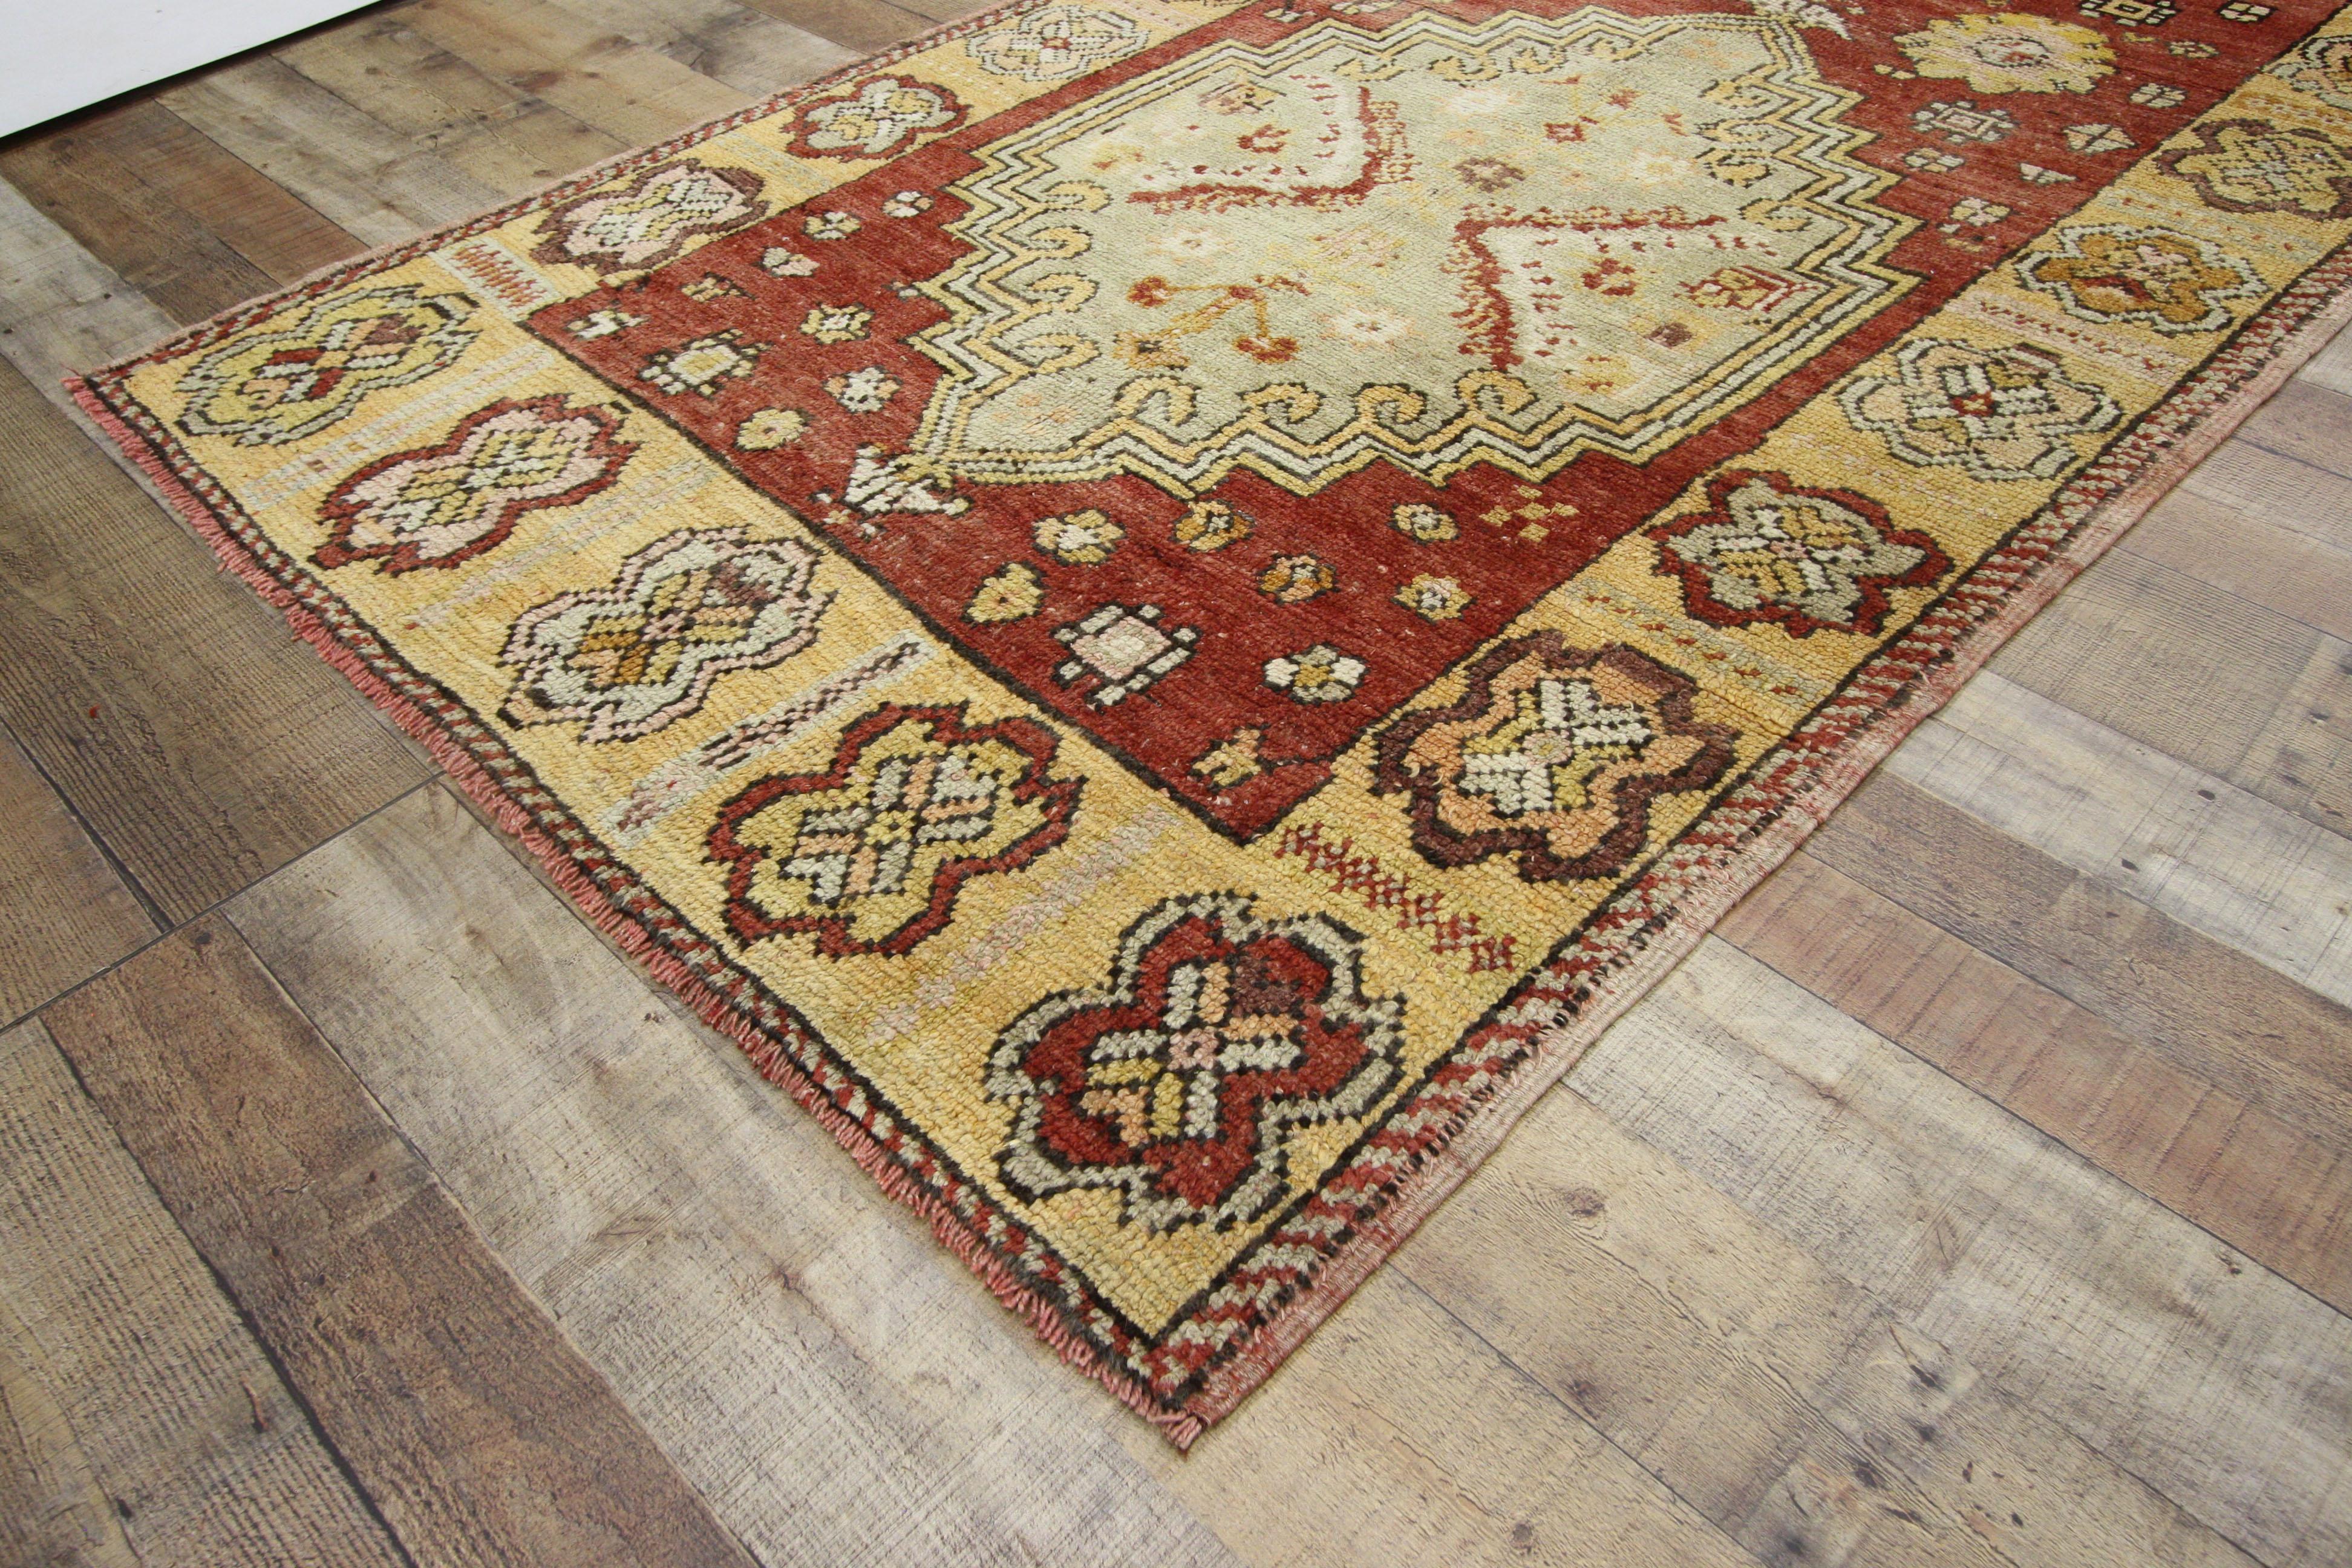 52404 Rustic Style Vintage Turkish Oushak runner, hallway runner 04'01 x 10'00. This hand-knotted wool vintage Turkish Oushak runner features two large stepped hexagonal medallions with floral pendants spread across an abrashed red field. Each